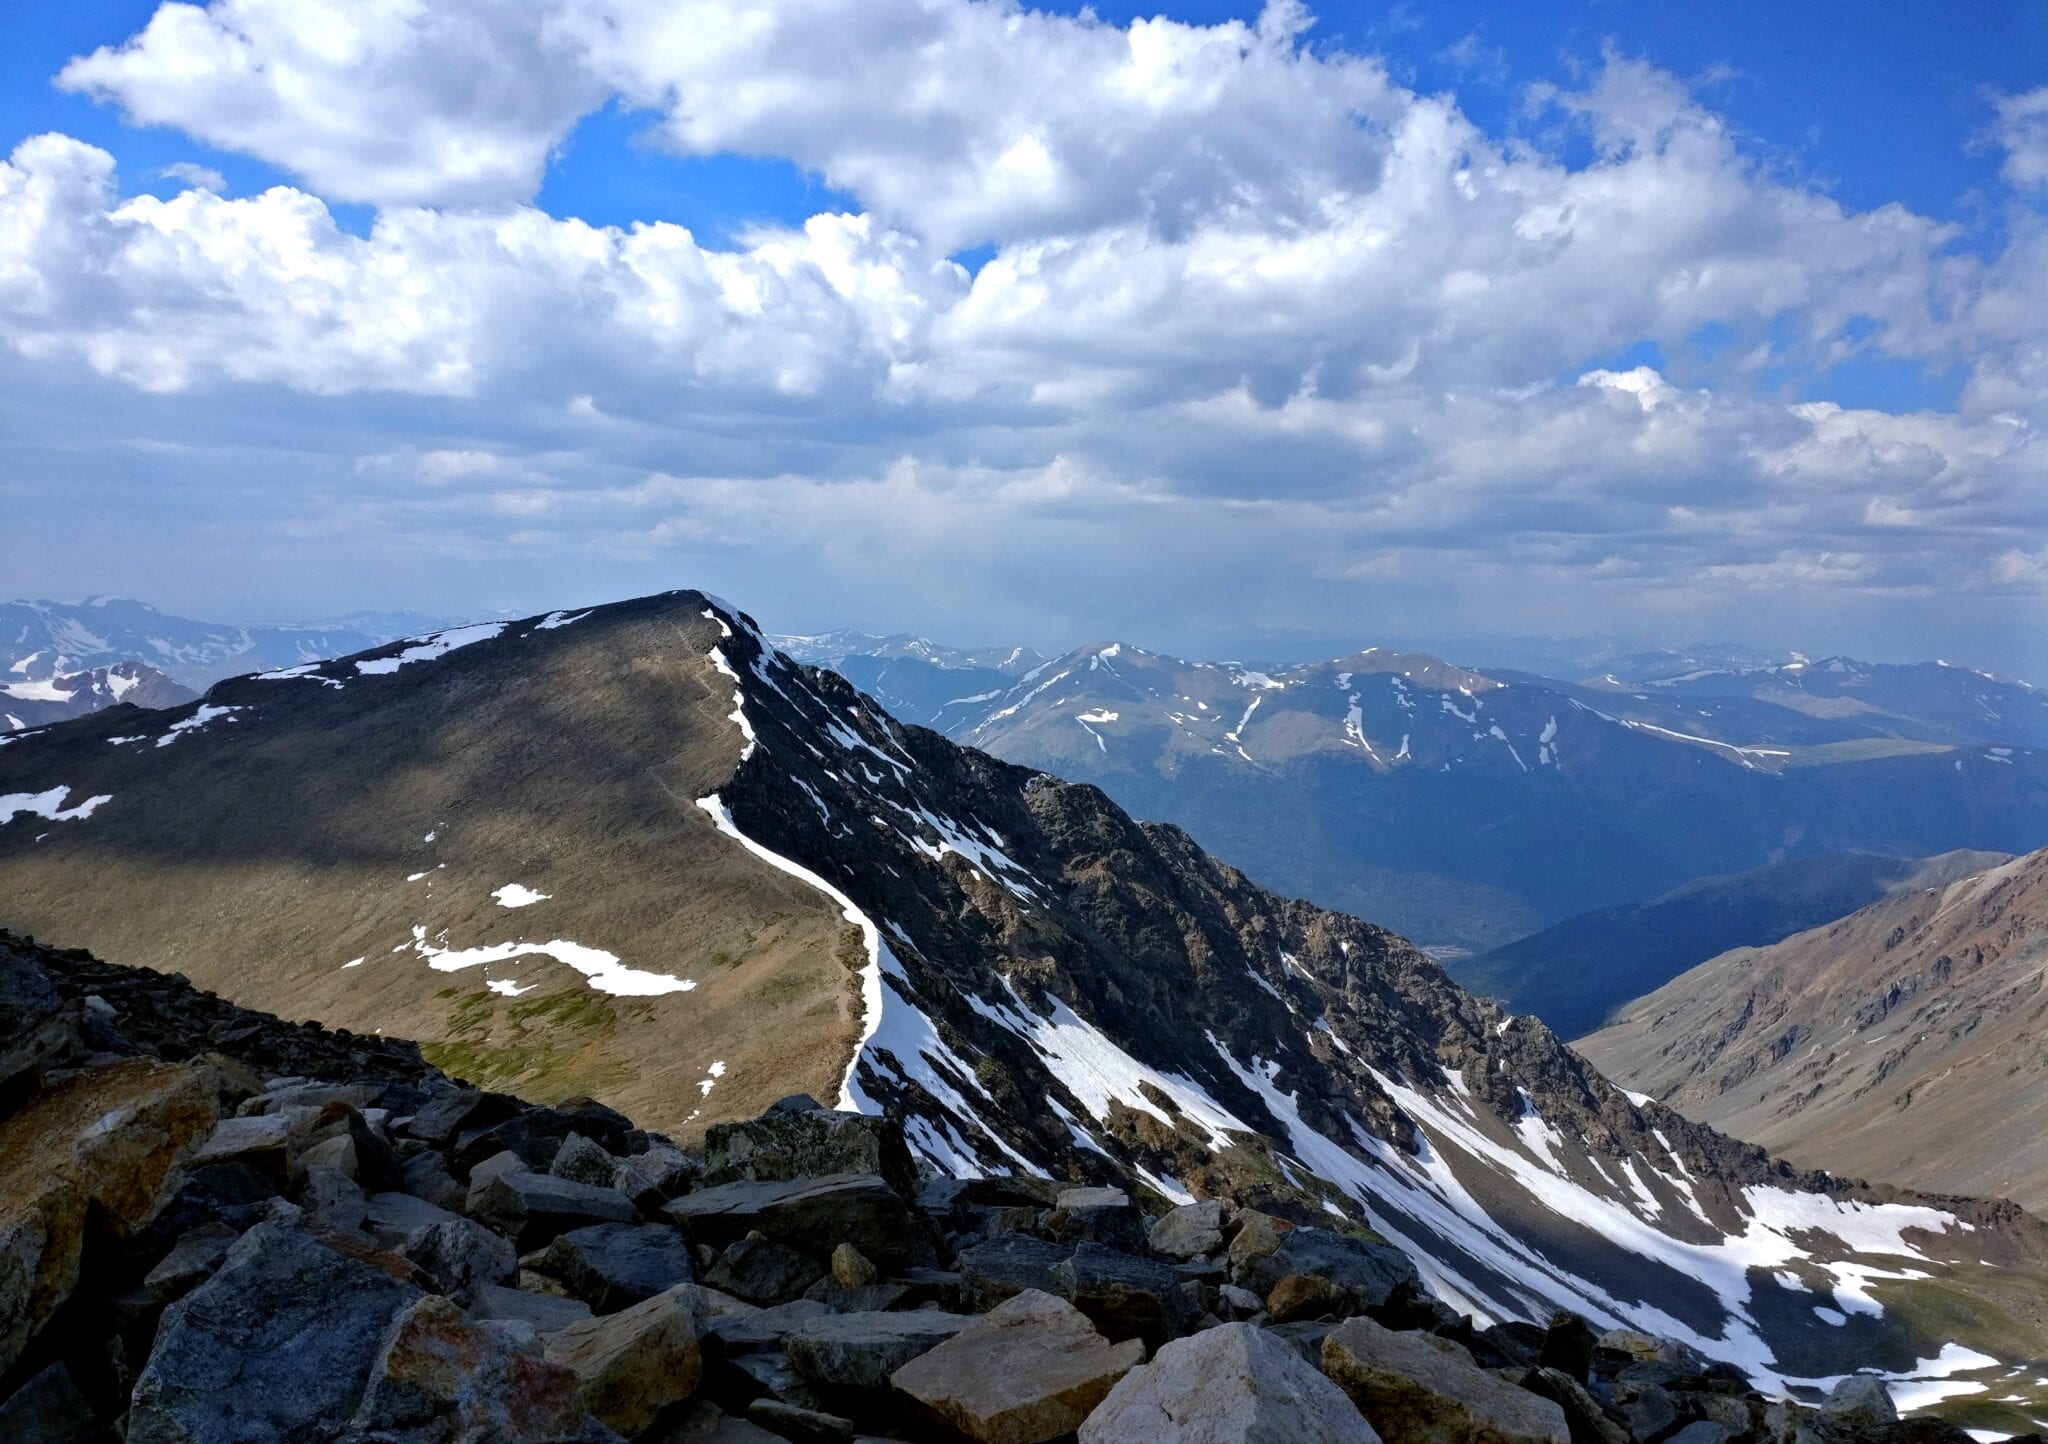 Grays Peak, Colorado along the Continental Divide Trail or CDT